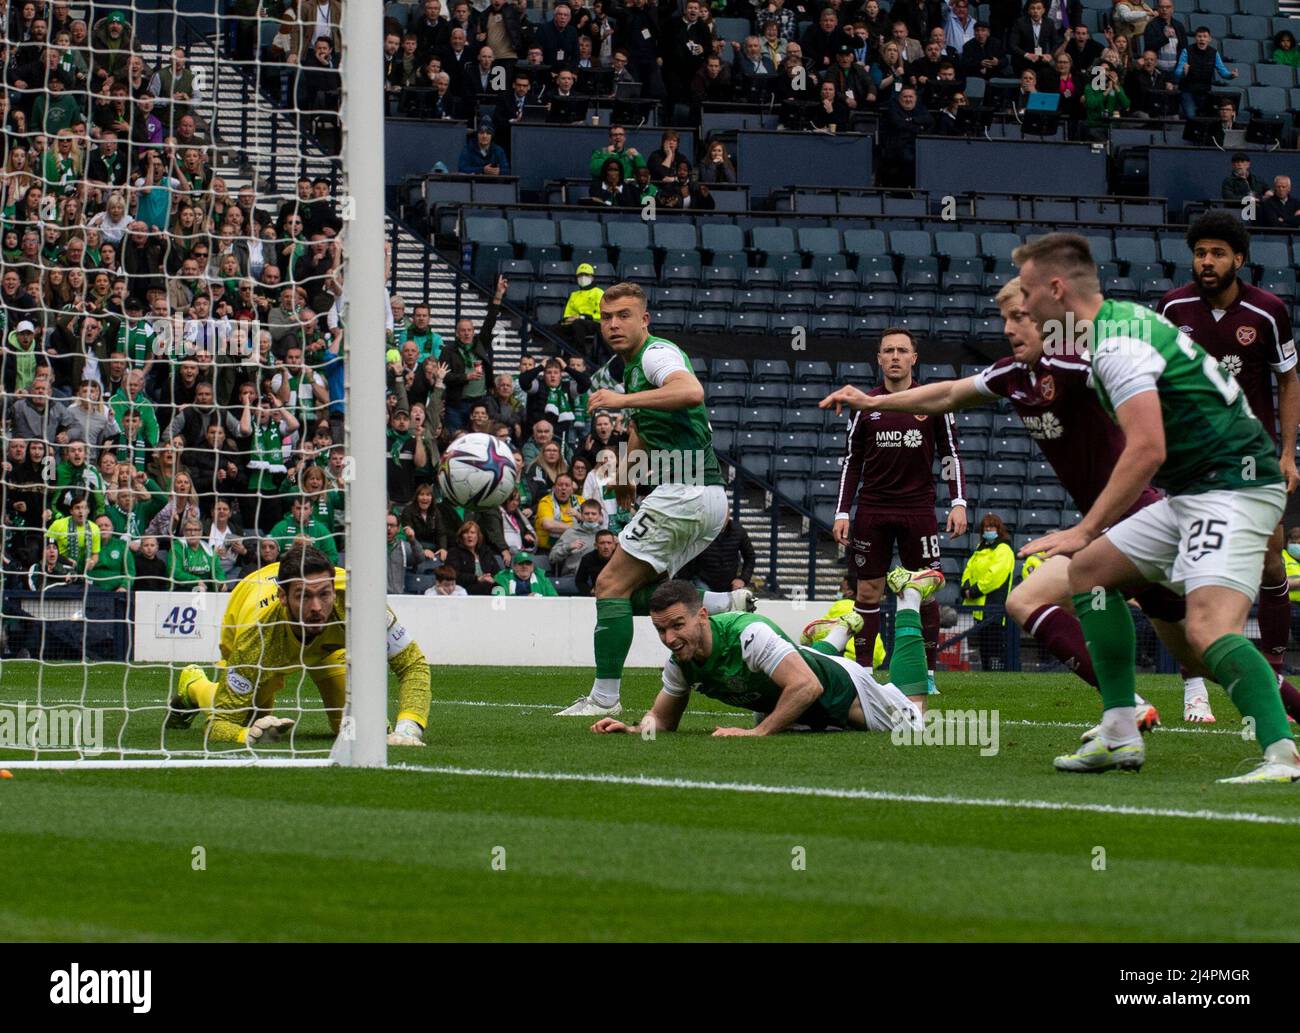 Glasgow, UK. 07th Apr, 2022. Scottish Cup semi final - Heart of Midlothian FC v Hibernian FC 07/04/2022 Pic shows: A world class save by Hearts' goalkeeper, Craig Gordon, prevents HibsÕ centre-back, Ryan PorteousÕ header going into the net as Hearts take on Hibs in the Scottish Cup semi final at Hampden Park, Glasgow Credit: Ian Jacobs/Alamy Live News Stock Photo